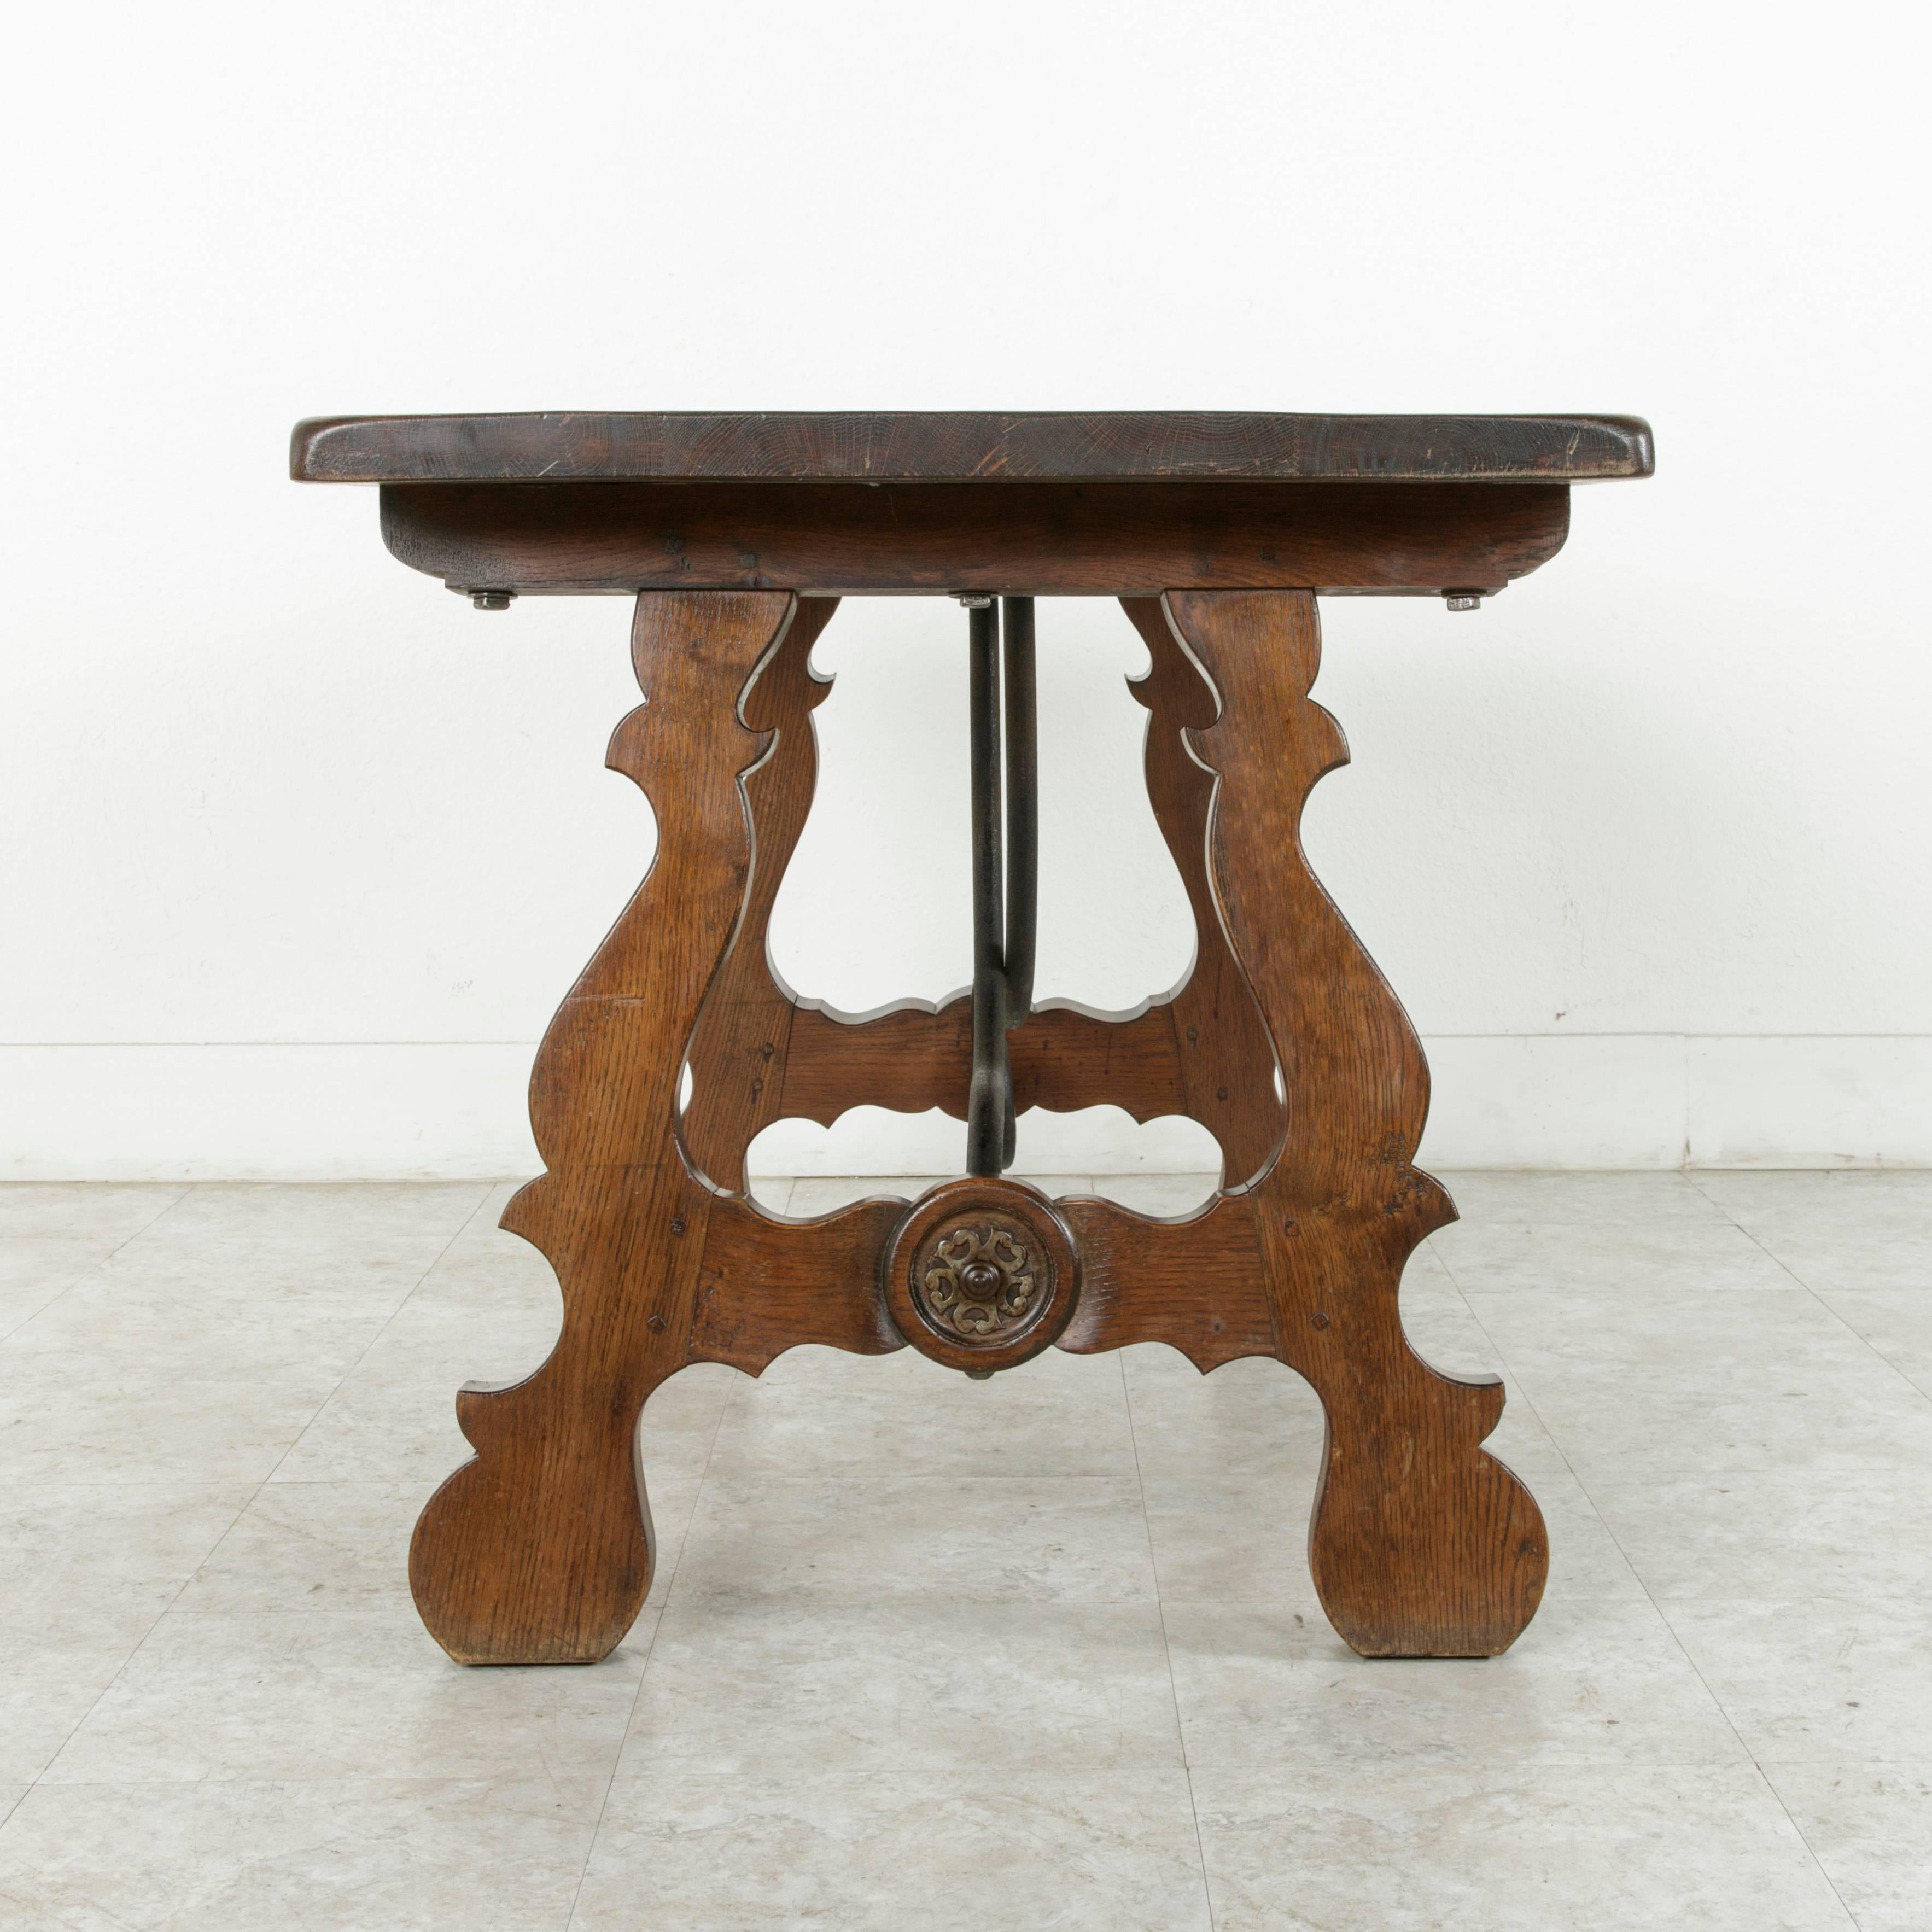 Forged Early 20th Century Spanish Renaissance Style Table or Desk with Iron Stretcher